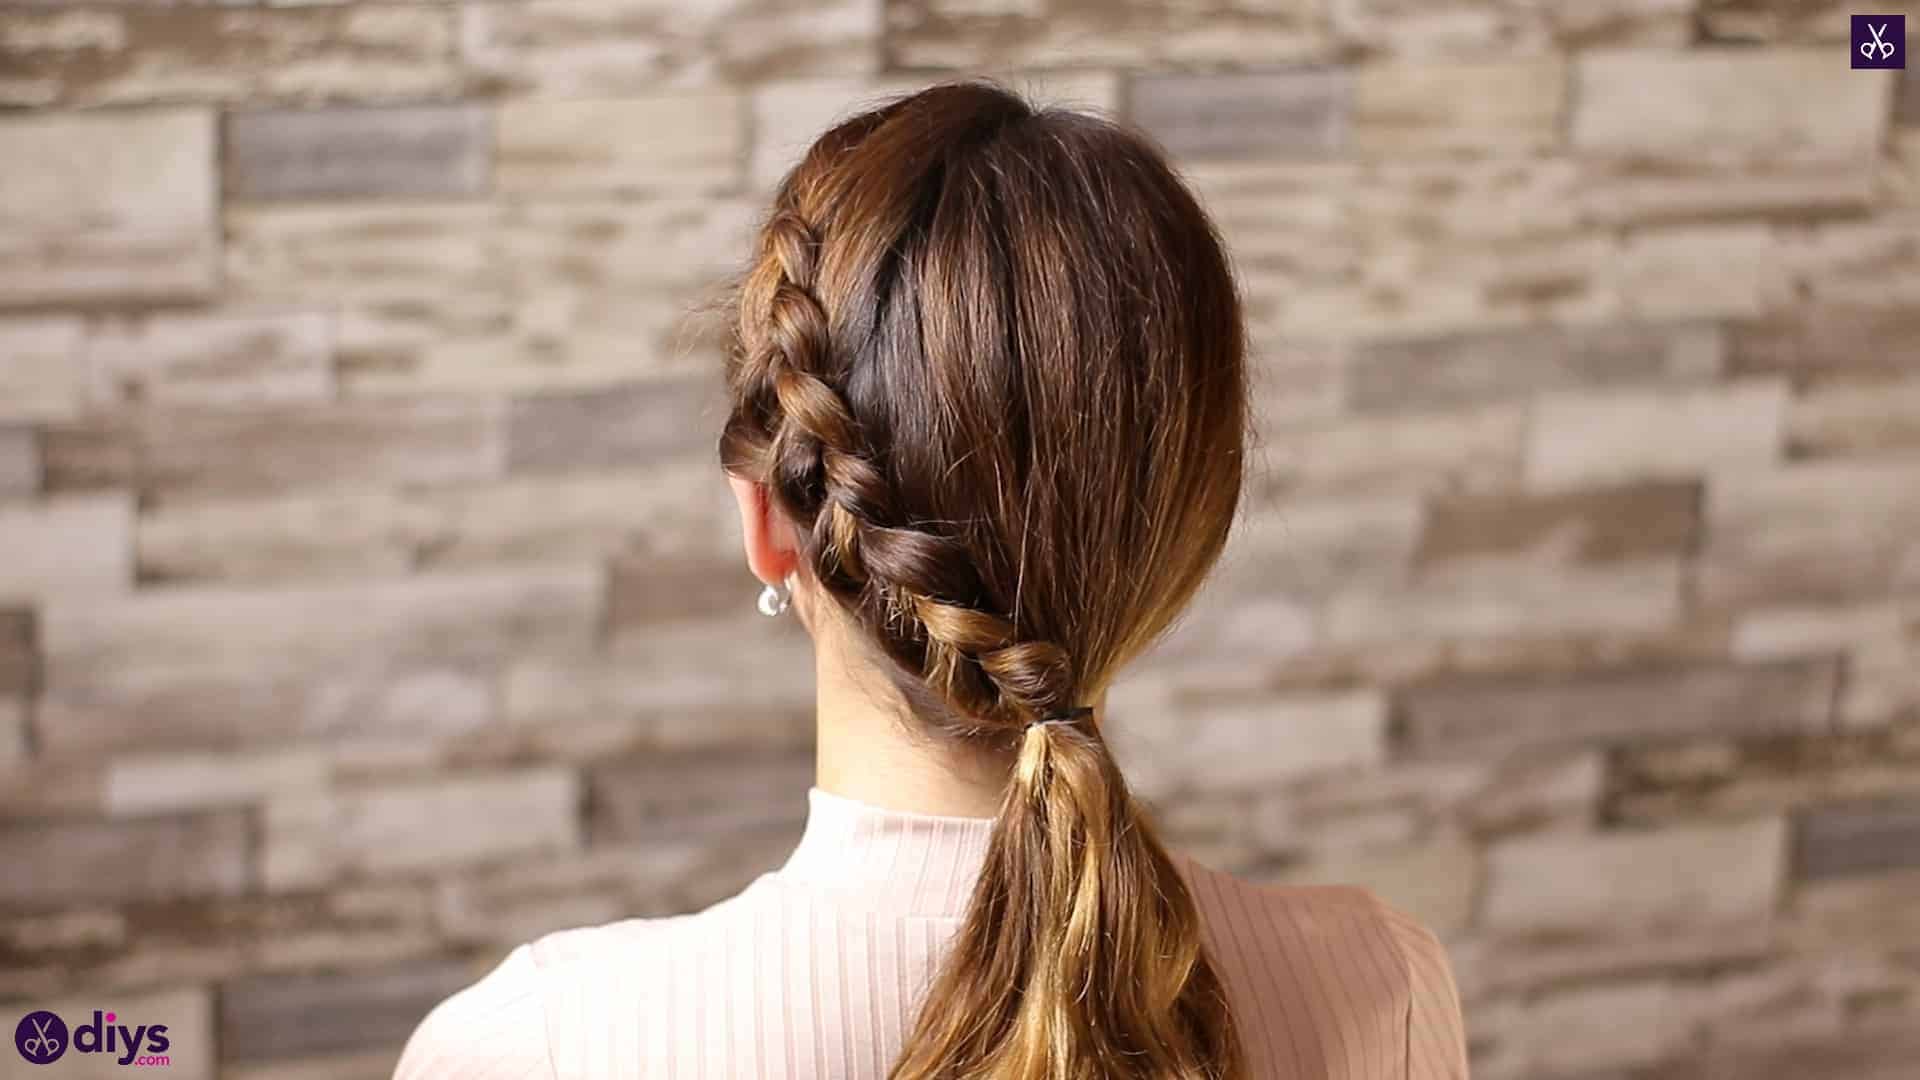 French Braid step by step 1 Take a section of hair 2 Divide into three  parts 3 Cross the l  French braid hairstyles Braids step by step Braids  for long hair